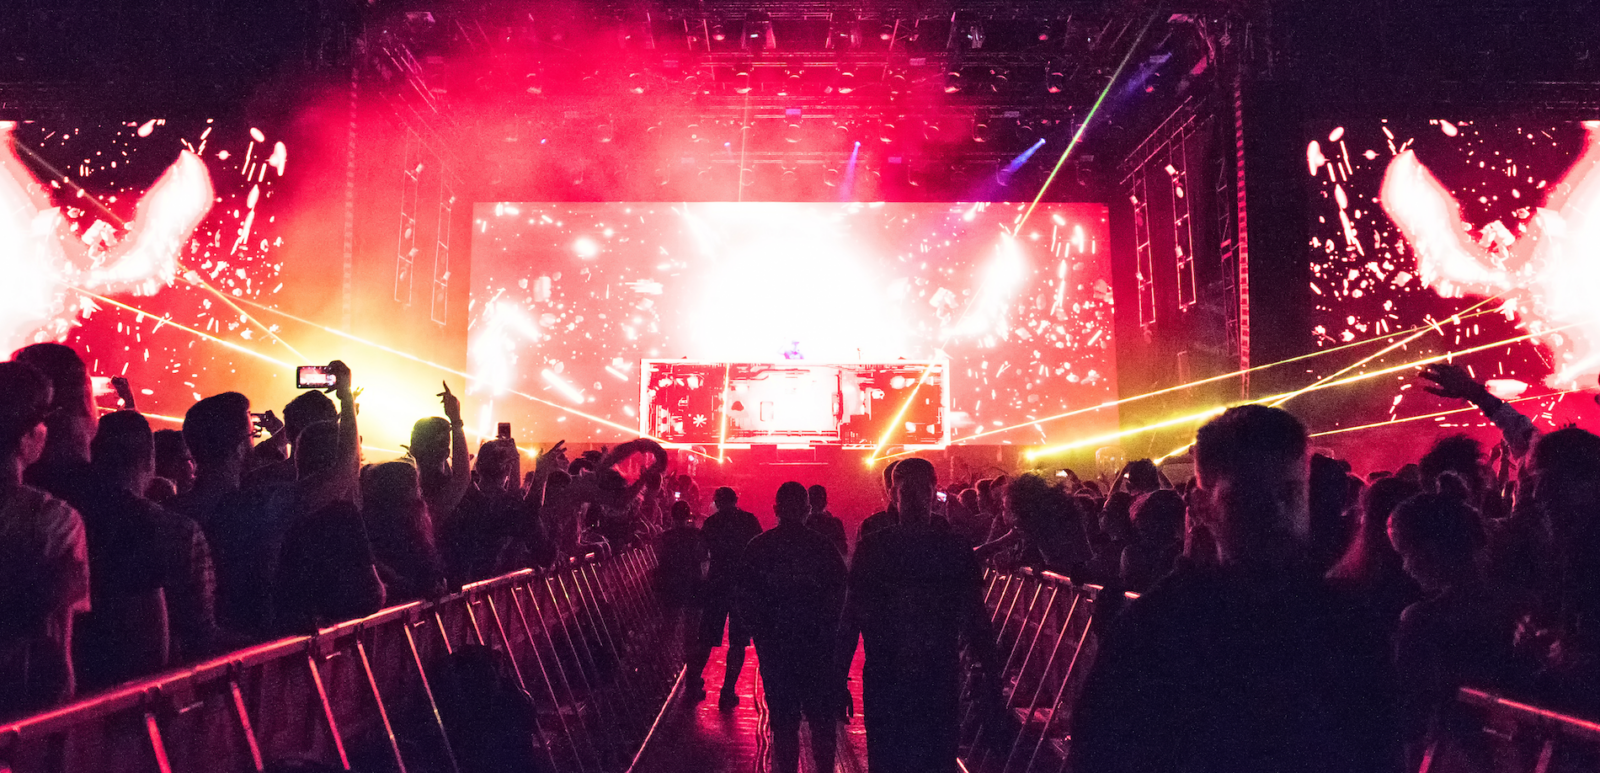 Excision performs live. Photo via Shutterstock.